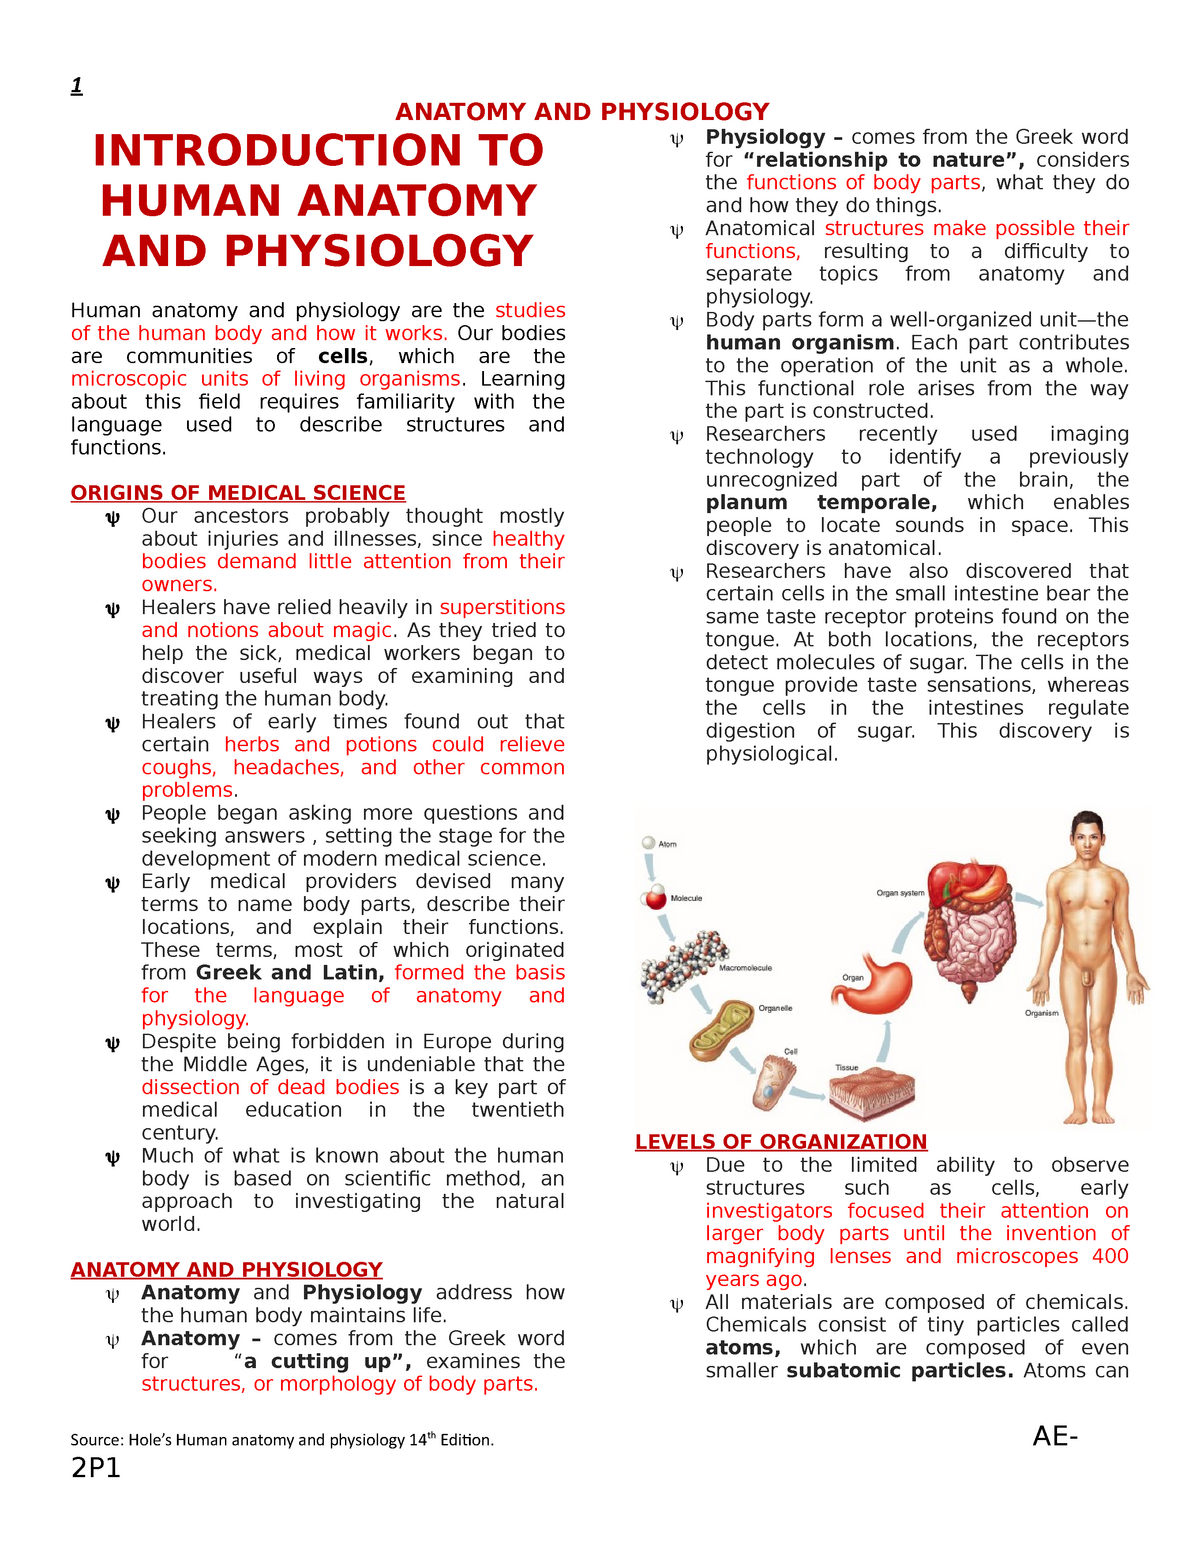 Holes Anatomy And Physiology 14th Edition Study Guide - Study Poster